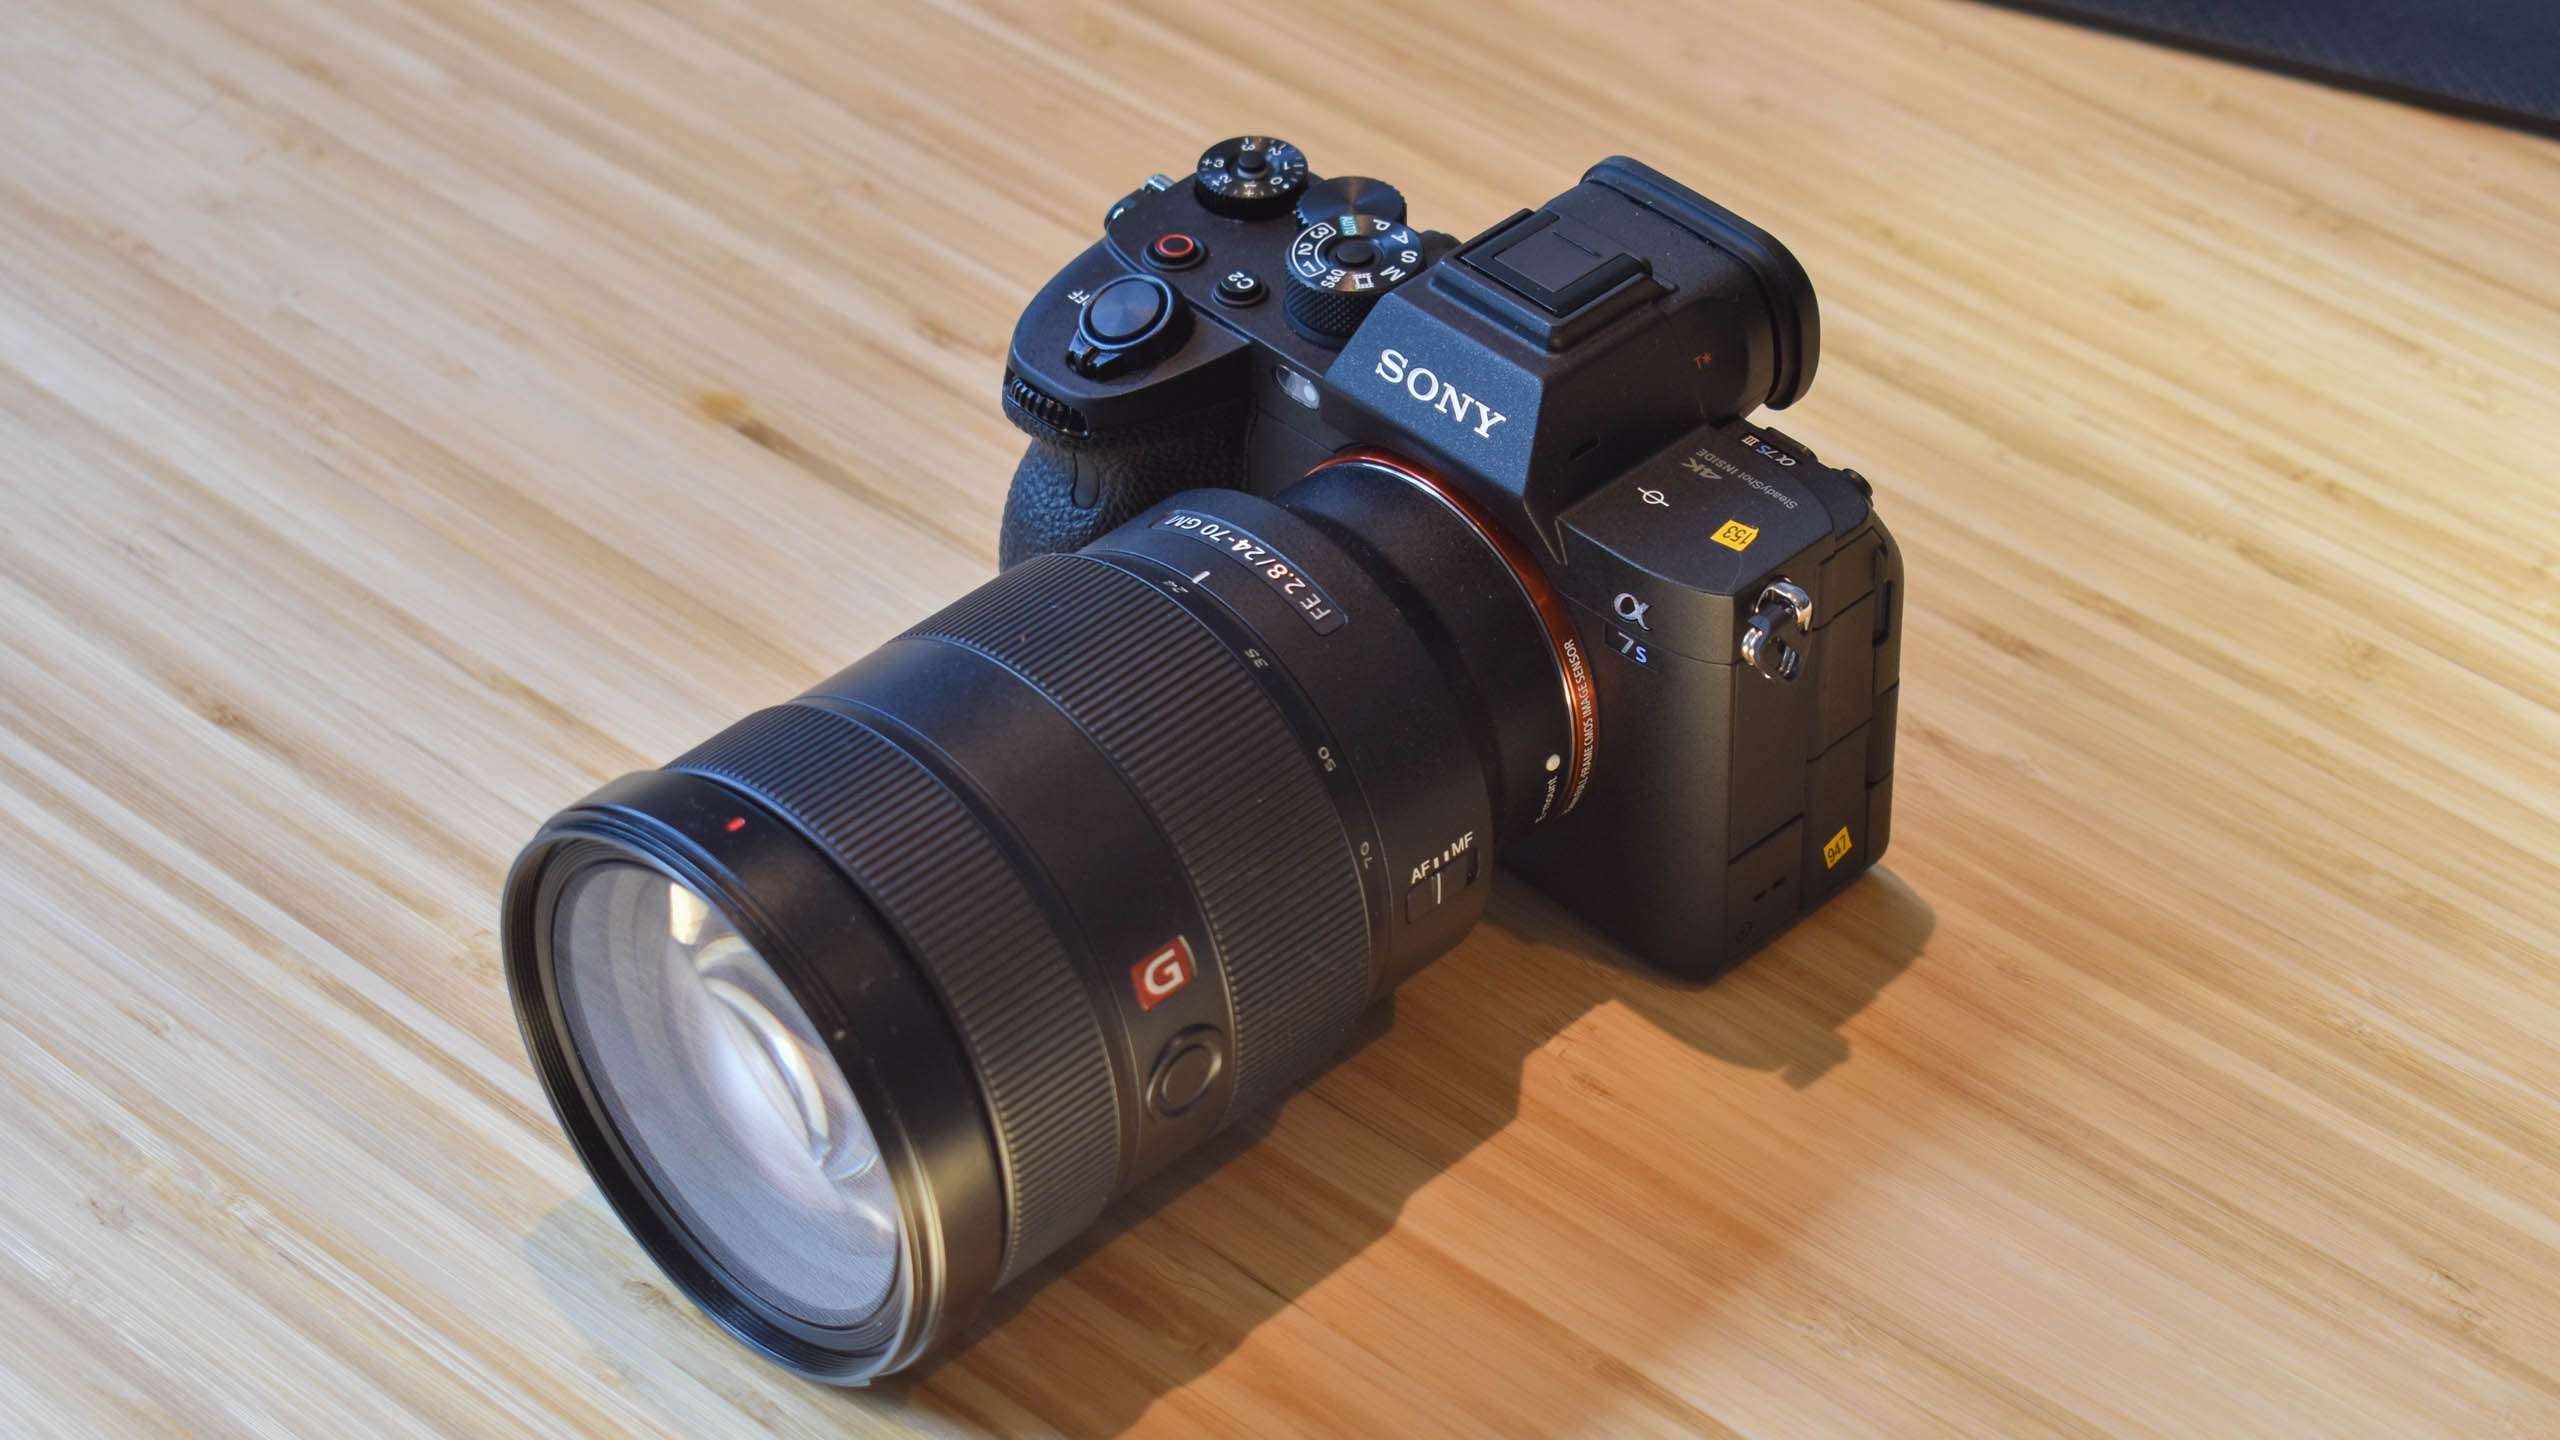 The Sony A7S III with a 24-70mm lens sitting in a wooden table